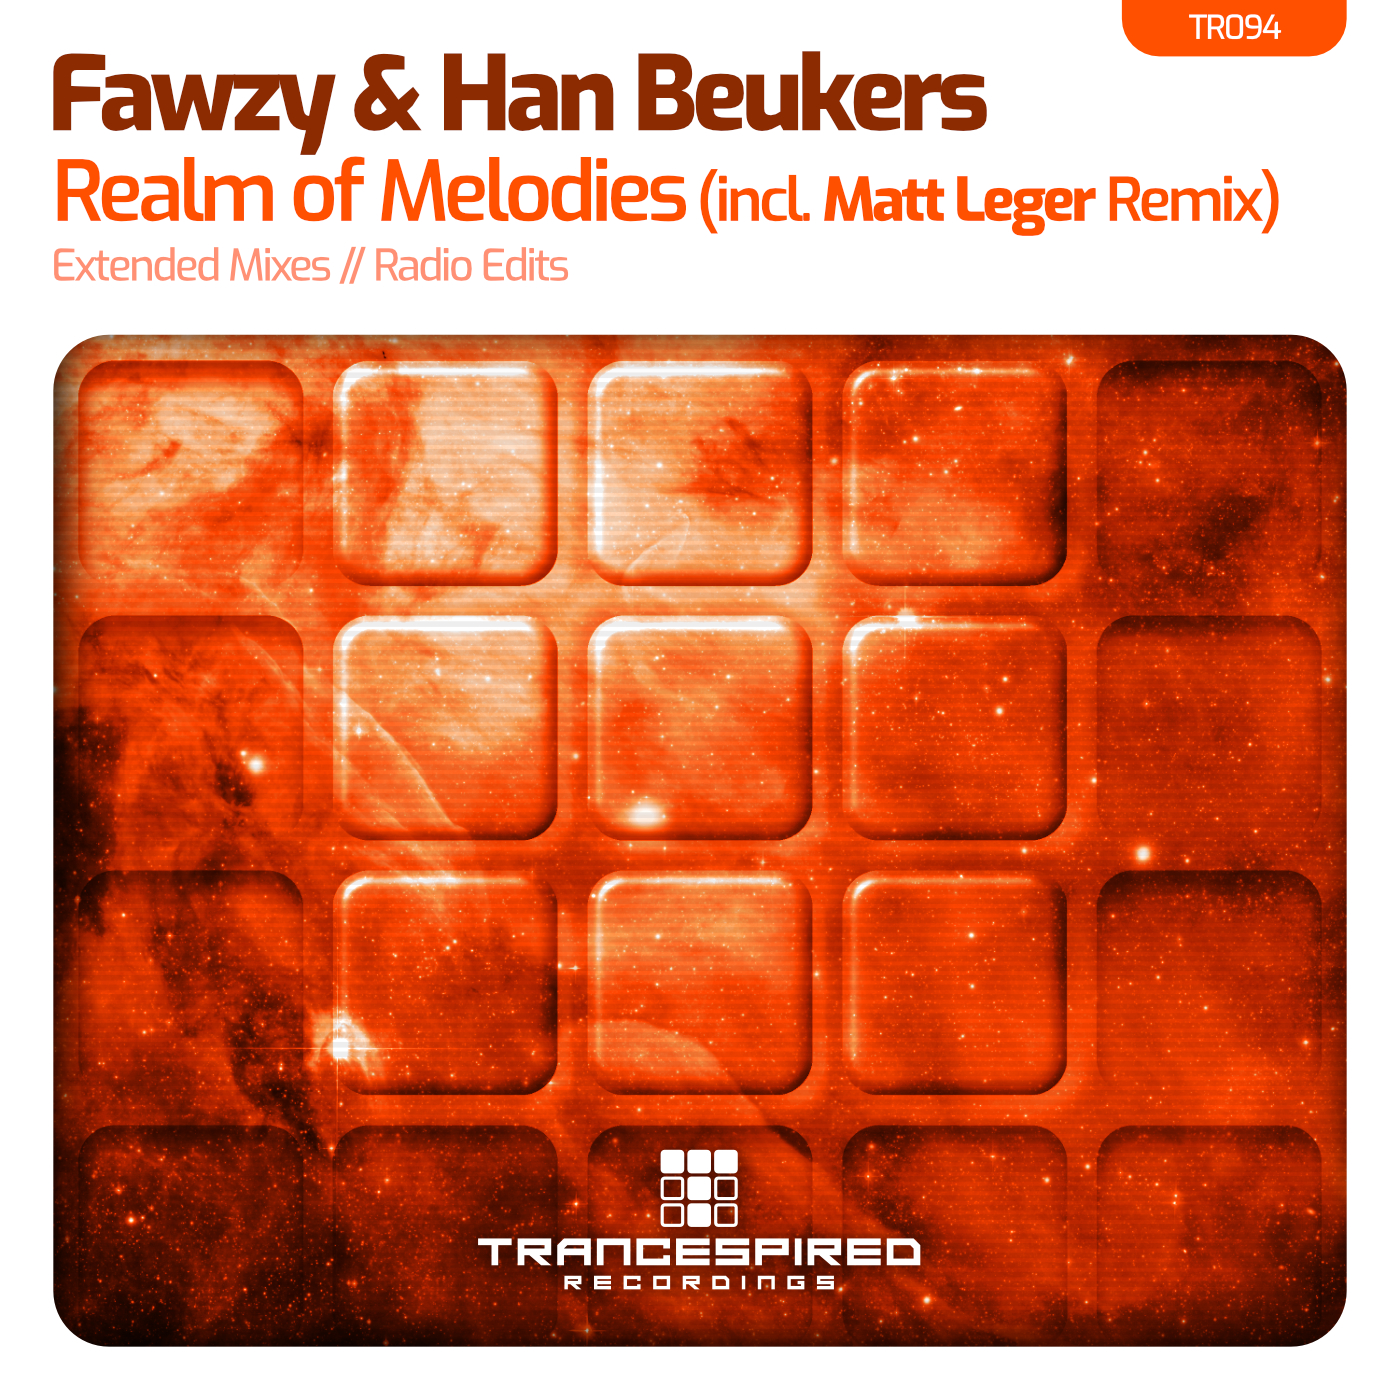 Fawzy and Han Beukers presents Realm of Melodies on Trancespired Recordings